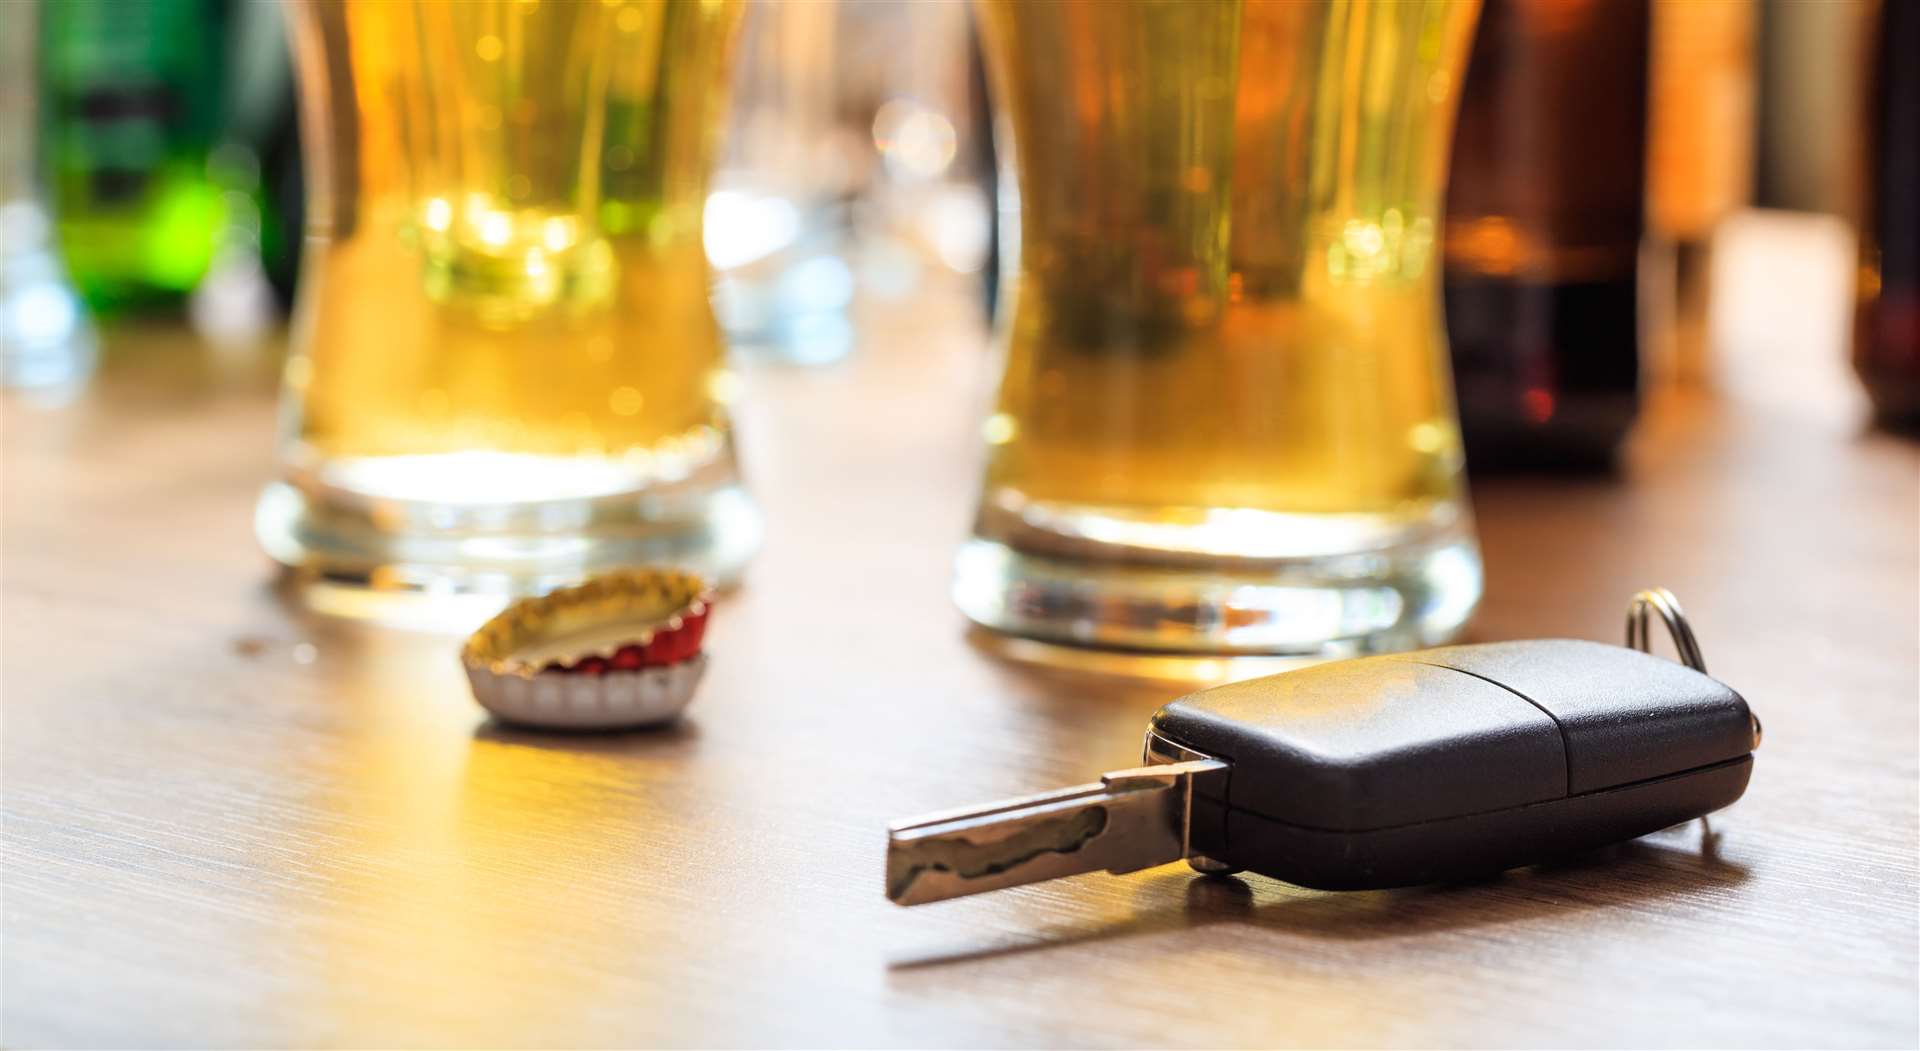 The current drink-drive limit in Scotland is 22 microgrammes of alcohol in 100 millilites of breath.